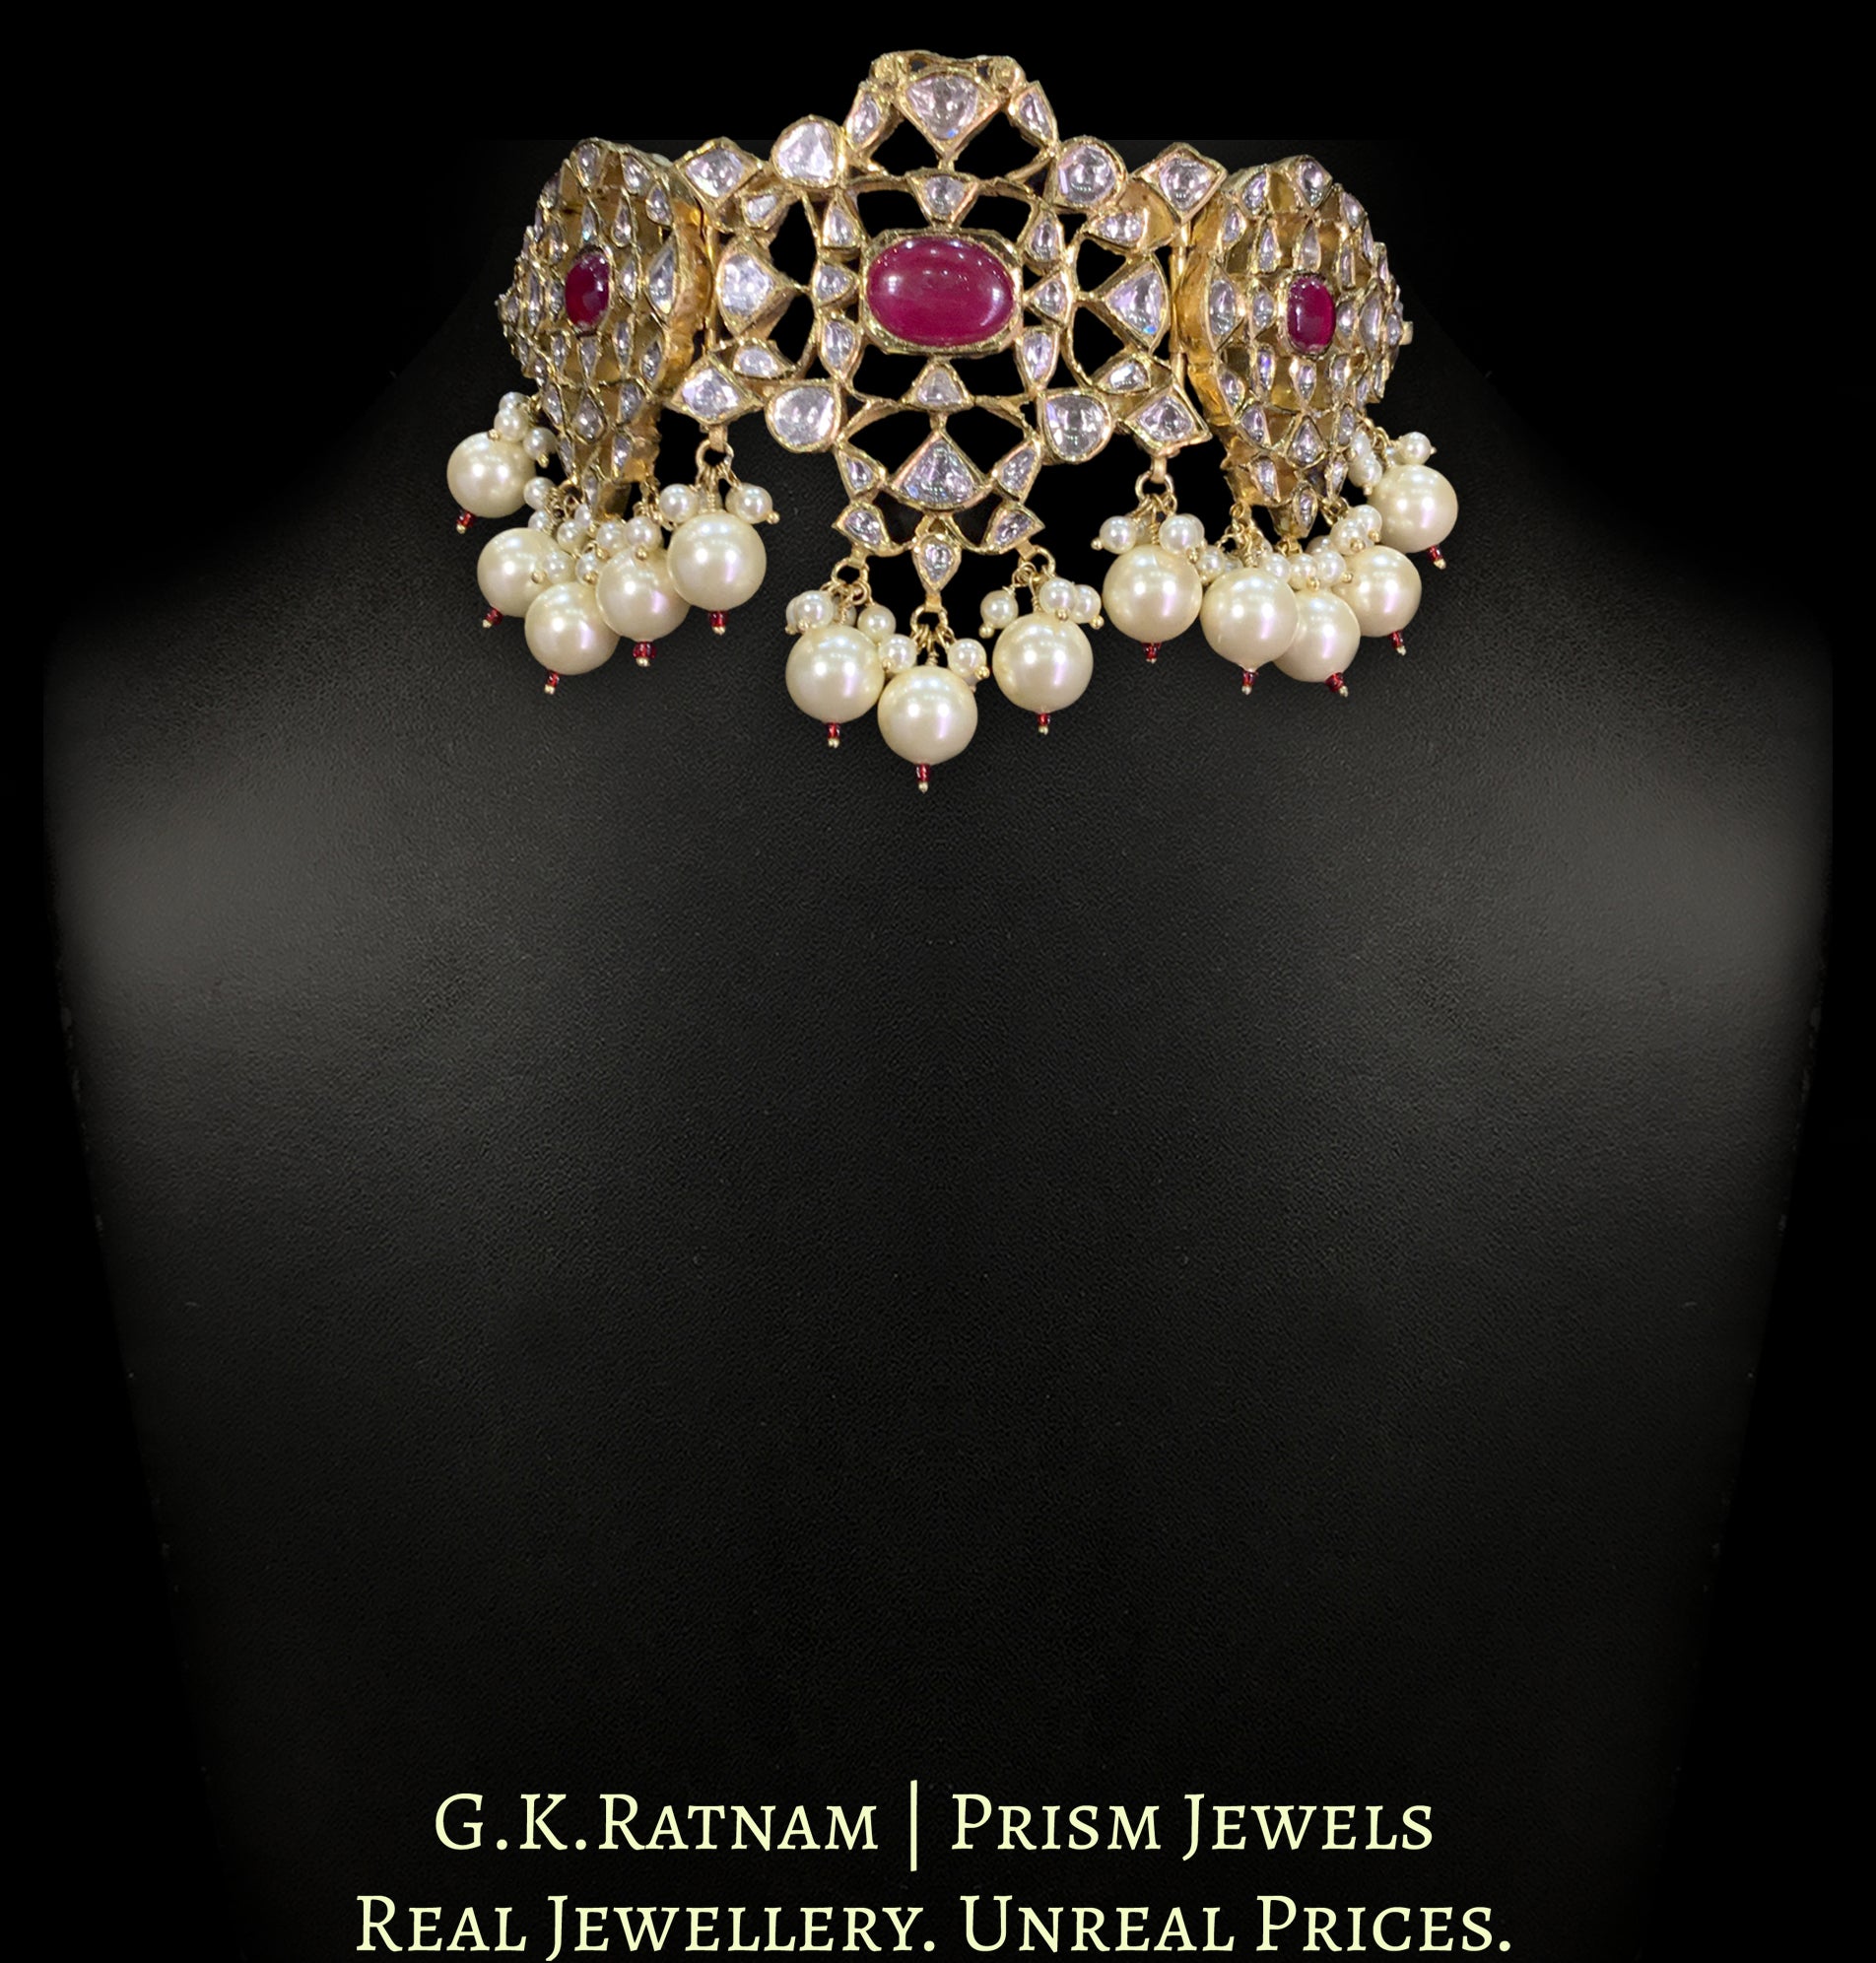 18k Gold and Diamond Polki Kilangi Cum Choker Necklace with Ruby and Pearls